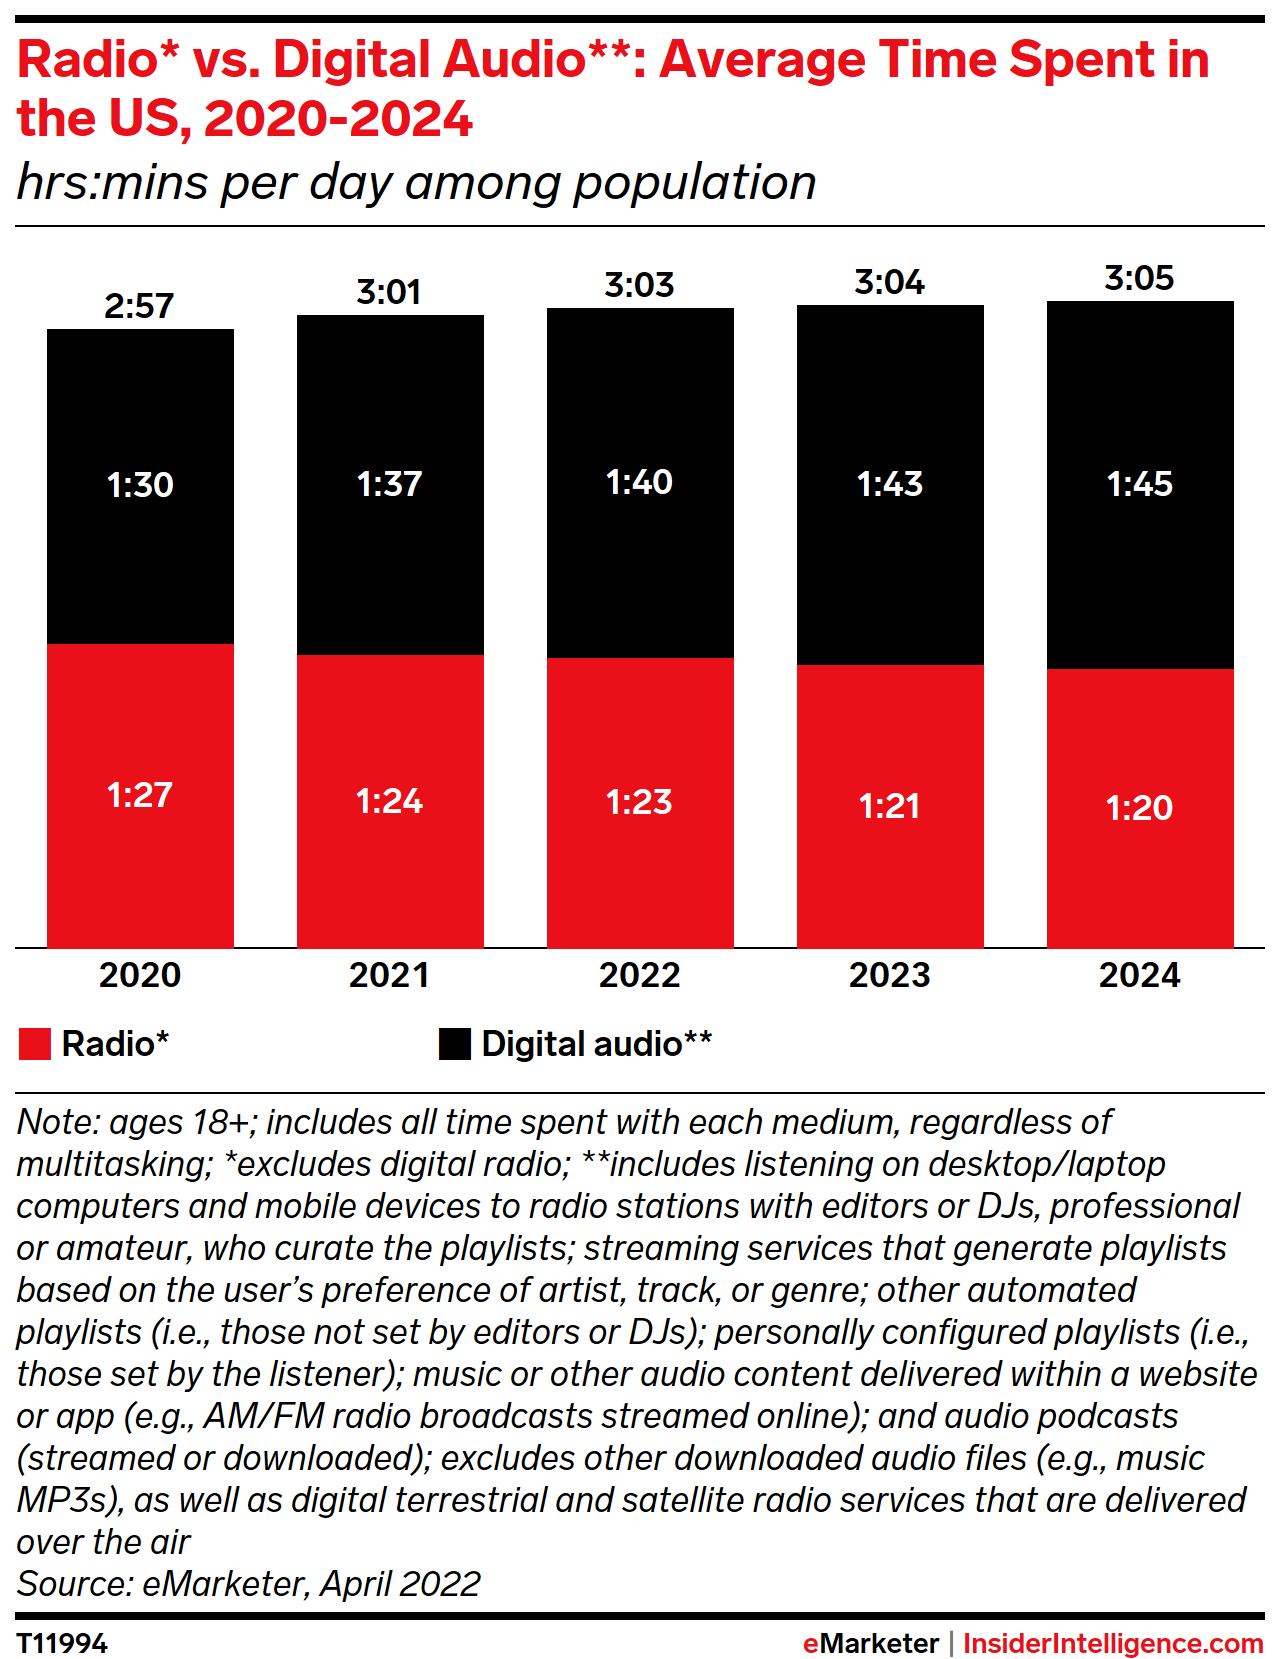 Radio* vs. Digital Audio**: Average Time Spent in the US, 2020-2024 (hrs:mins per day among population)